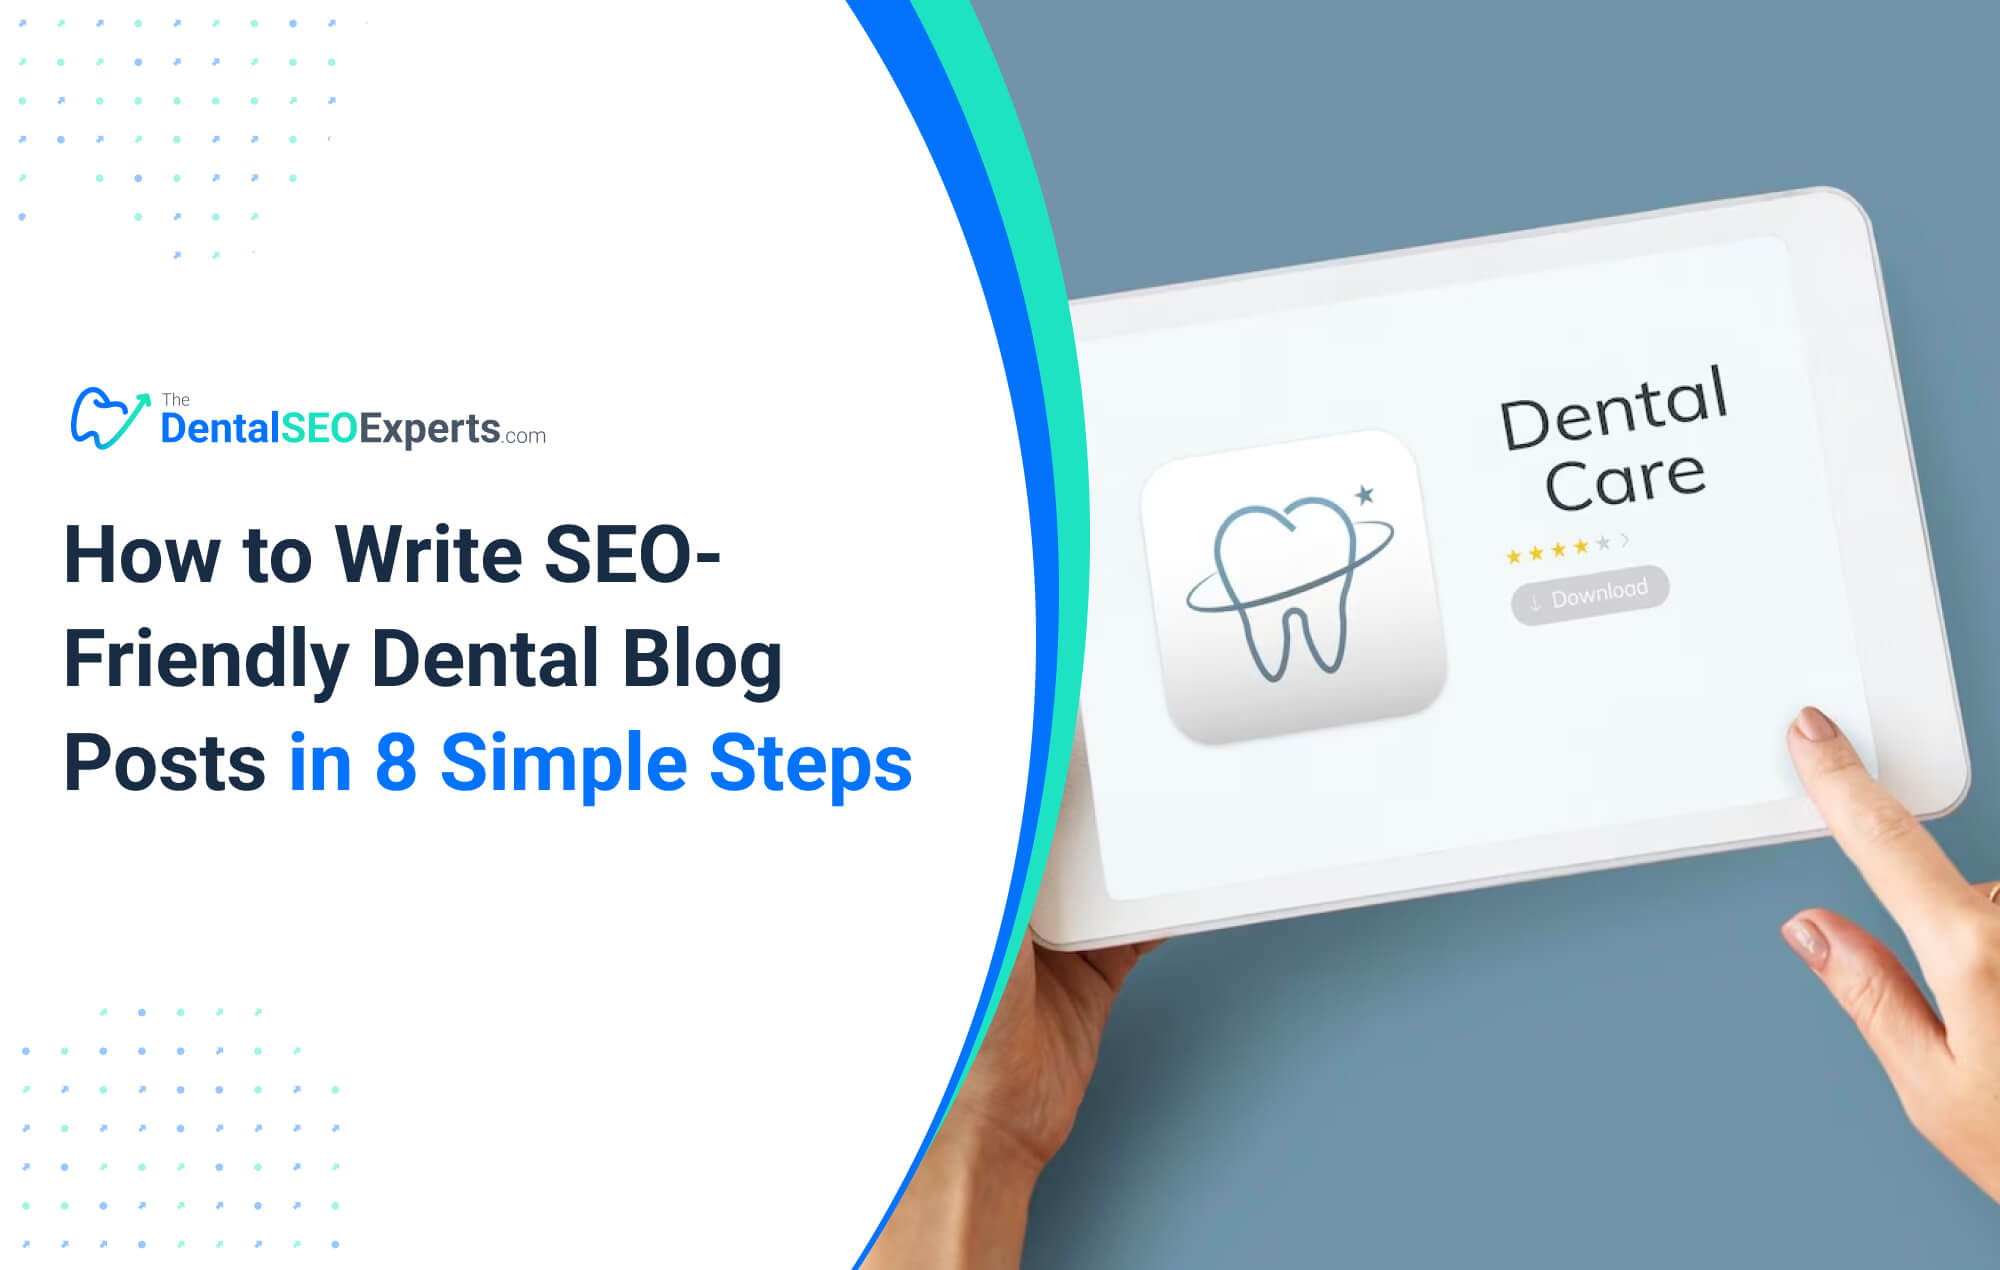 How to Write Dental Blog Posts for SEO In 8 Simple Steps